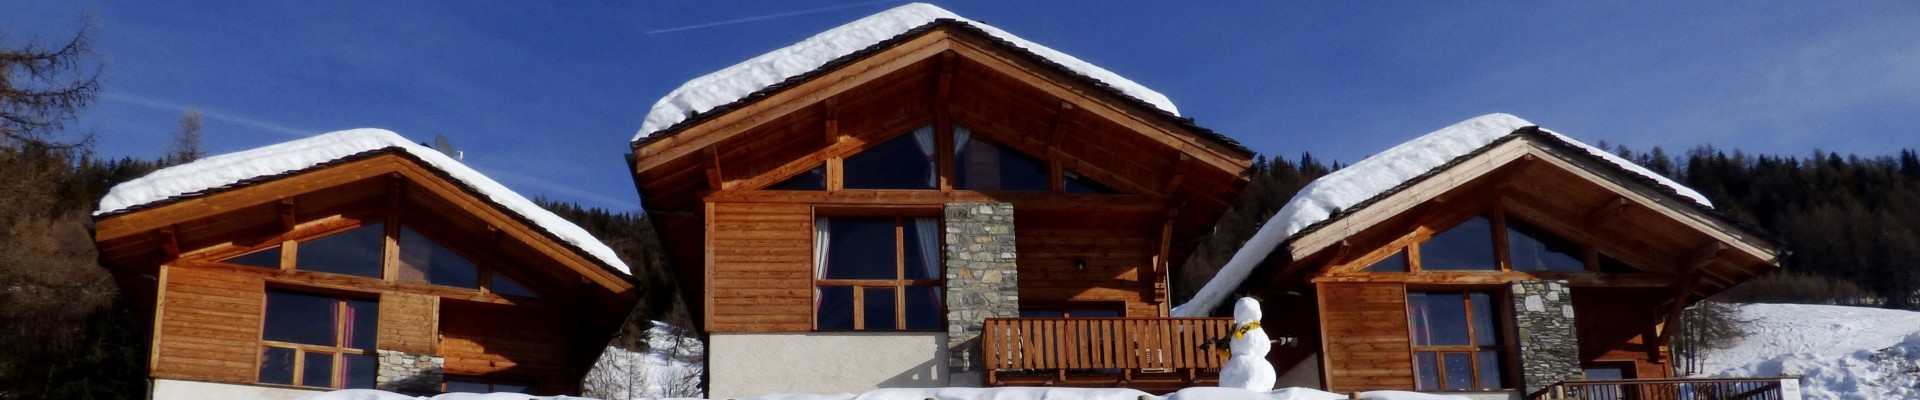 locations-meubles-chalets-hiver-9-10460